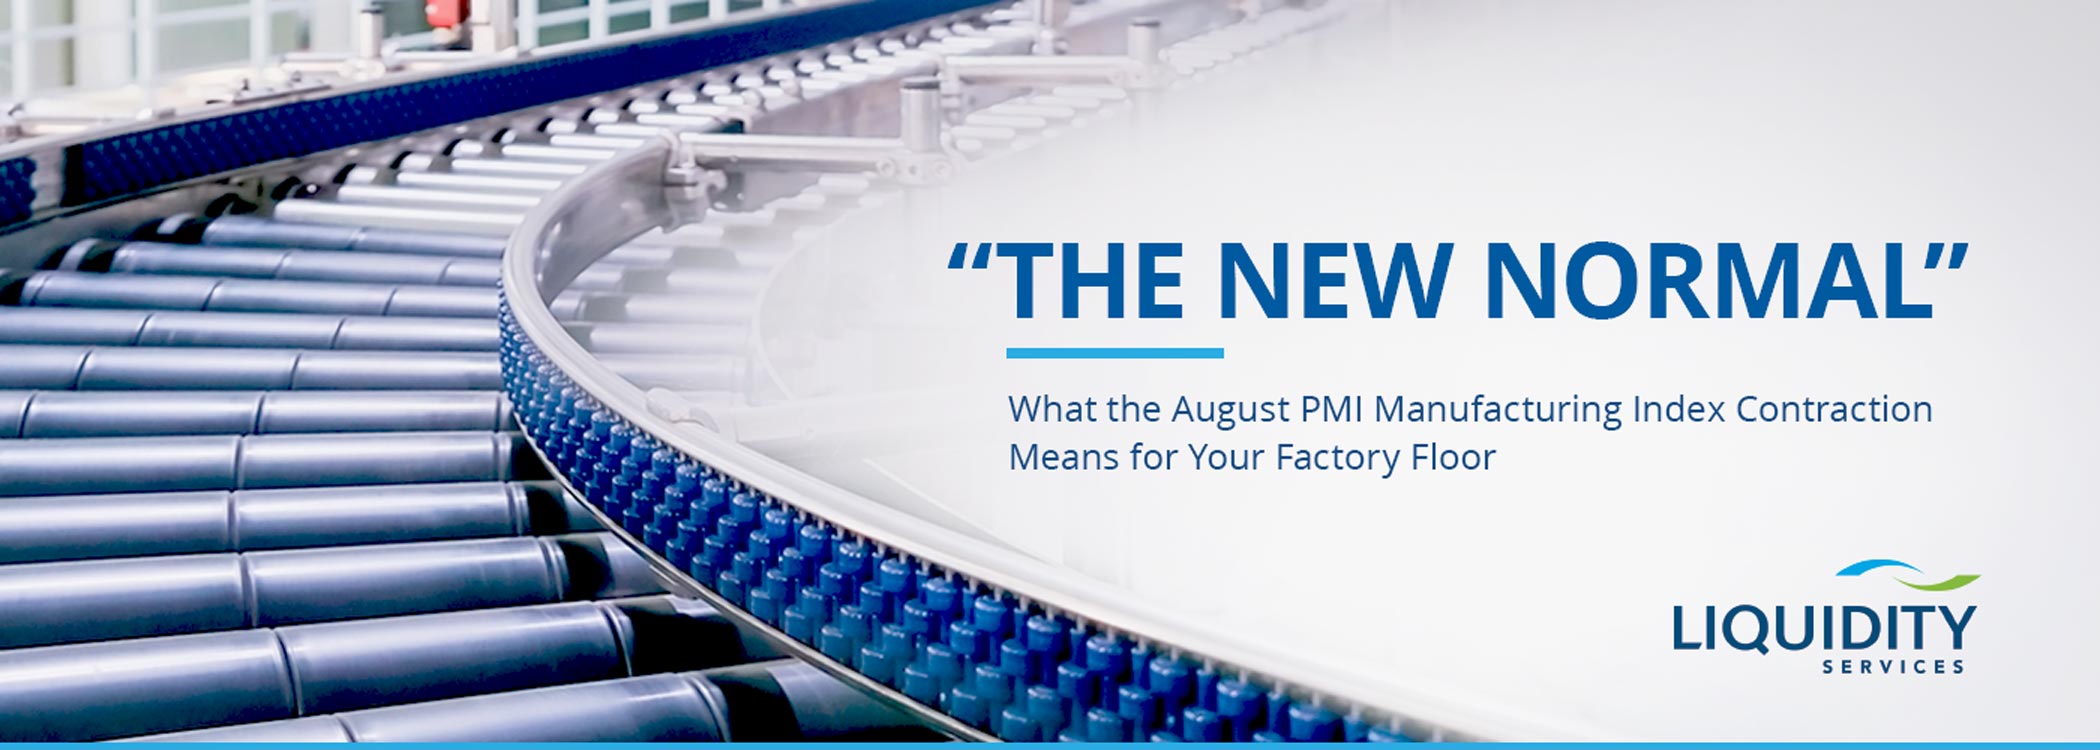 The August 2019 PMI contraction means supply chain problems | Liquidity Services